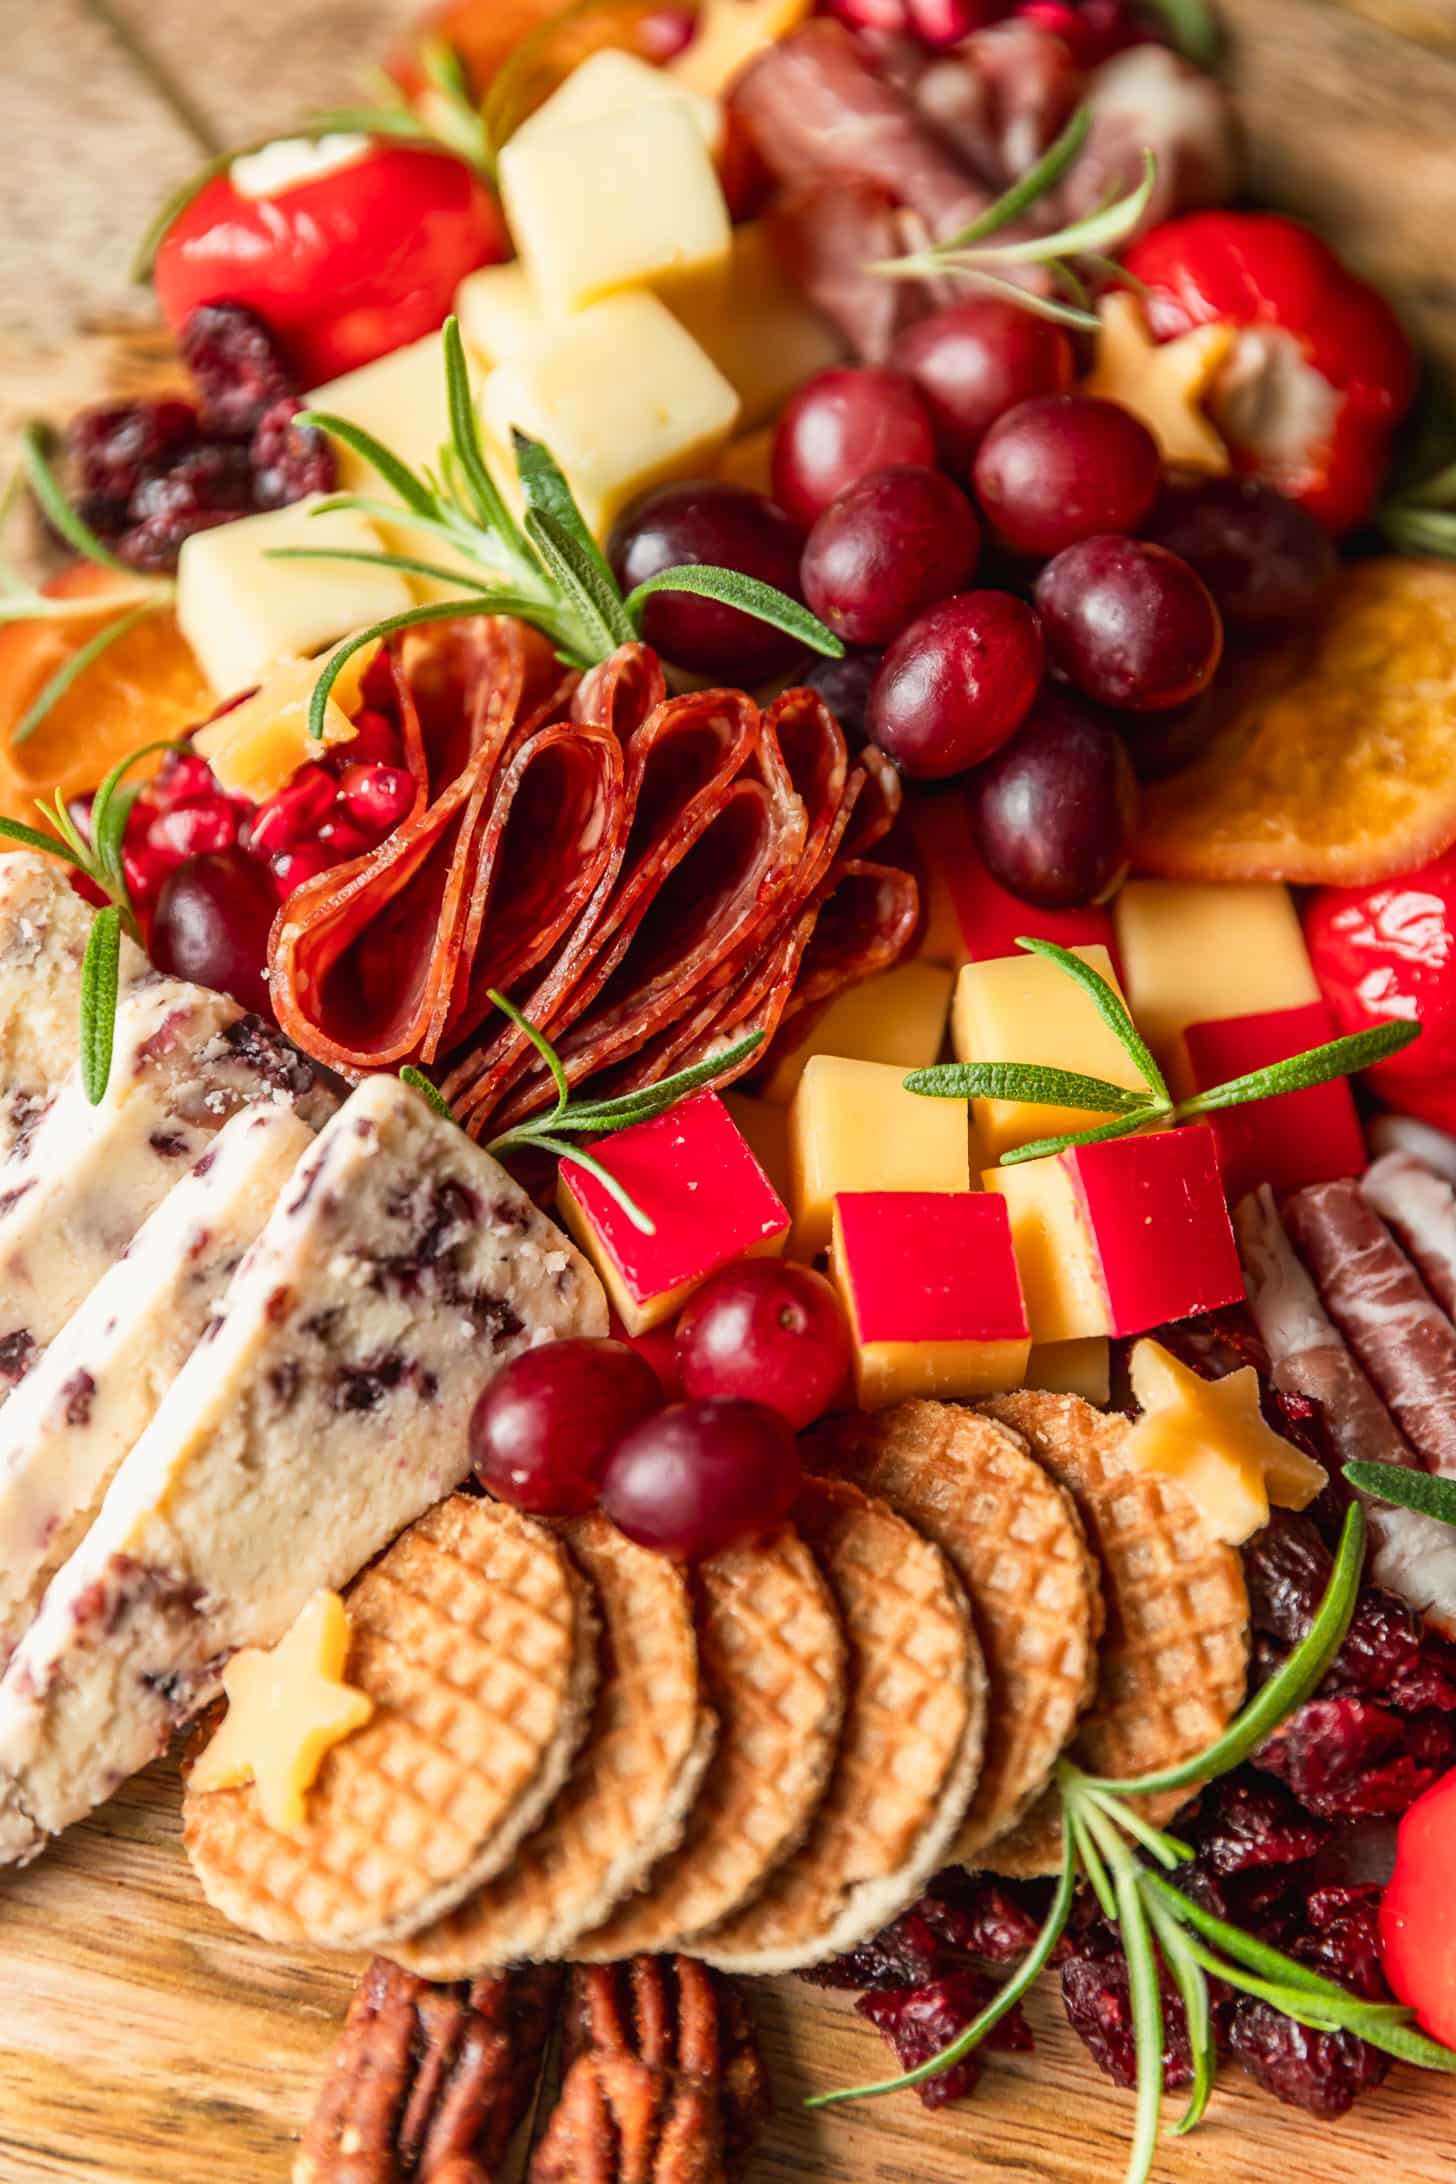 A close up of cheeses, meats, grapes, peppers, rosemary, cookies, and dried fruit on a wood platter.